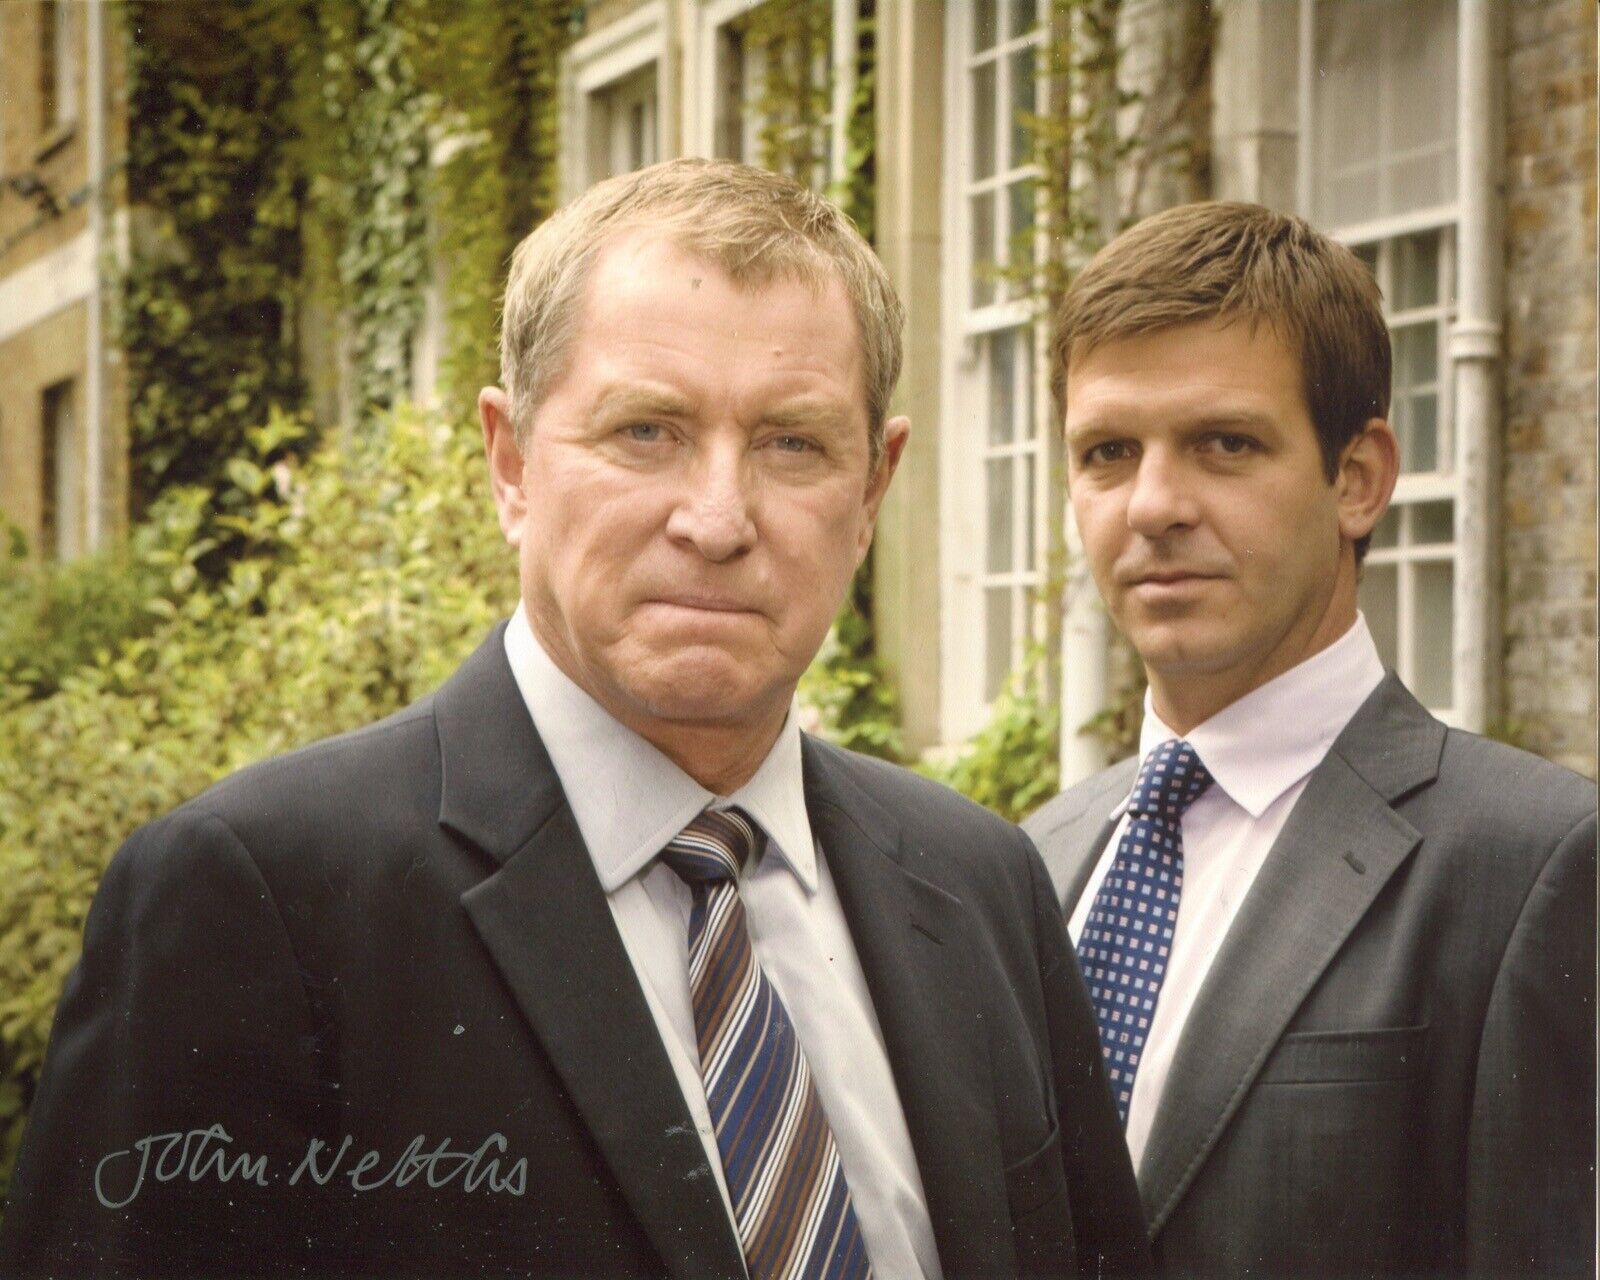 Midsomer Murders 8x10 TV detective Photo Poster painting signed by actor John Nettles IMAGE No11